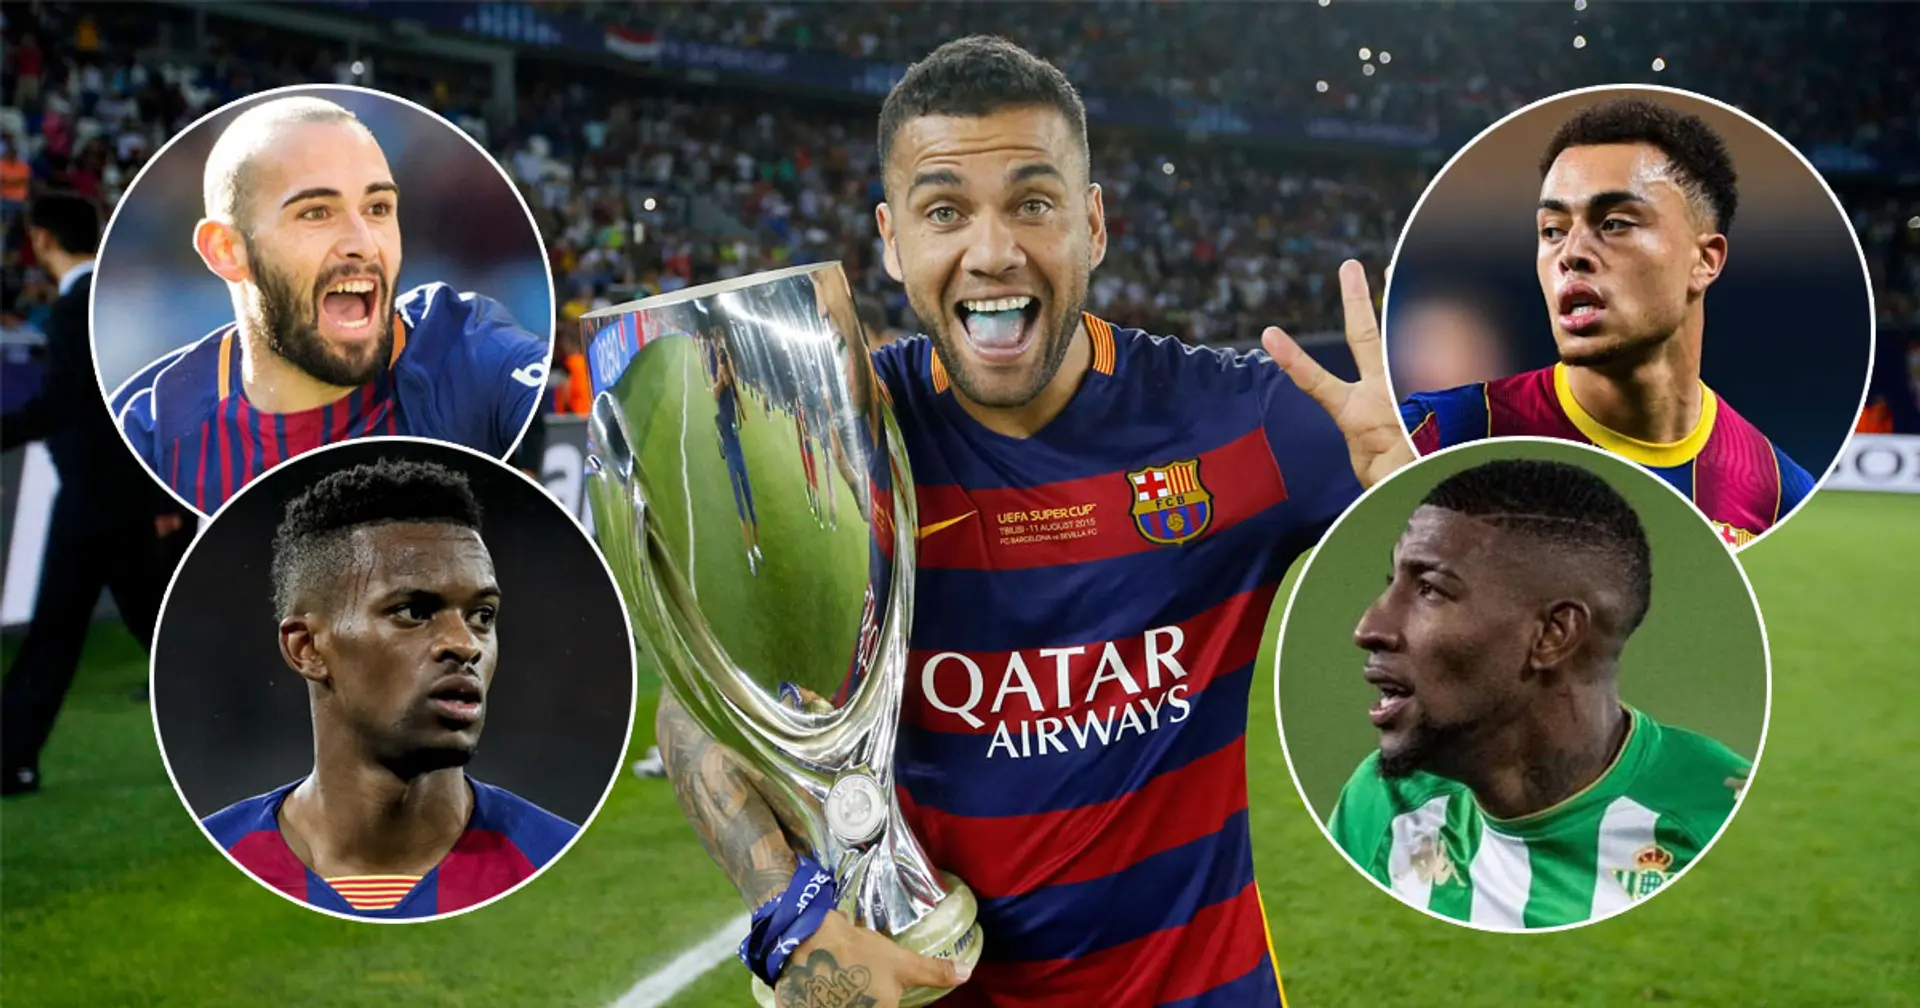 Will Emerson be the answer? Barca have so far spent €93m on Dani Alves replacements